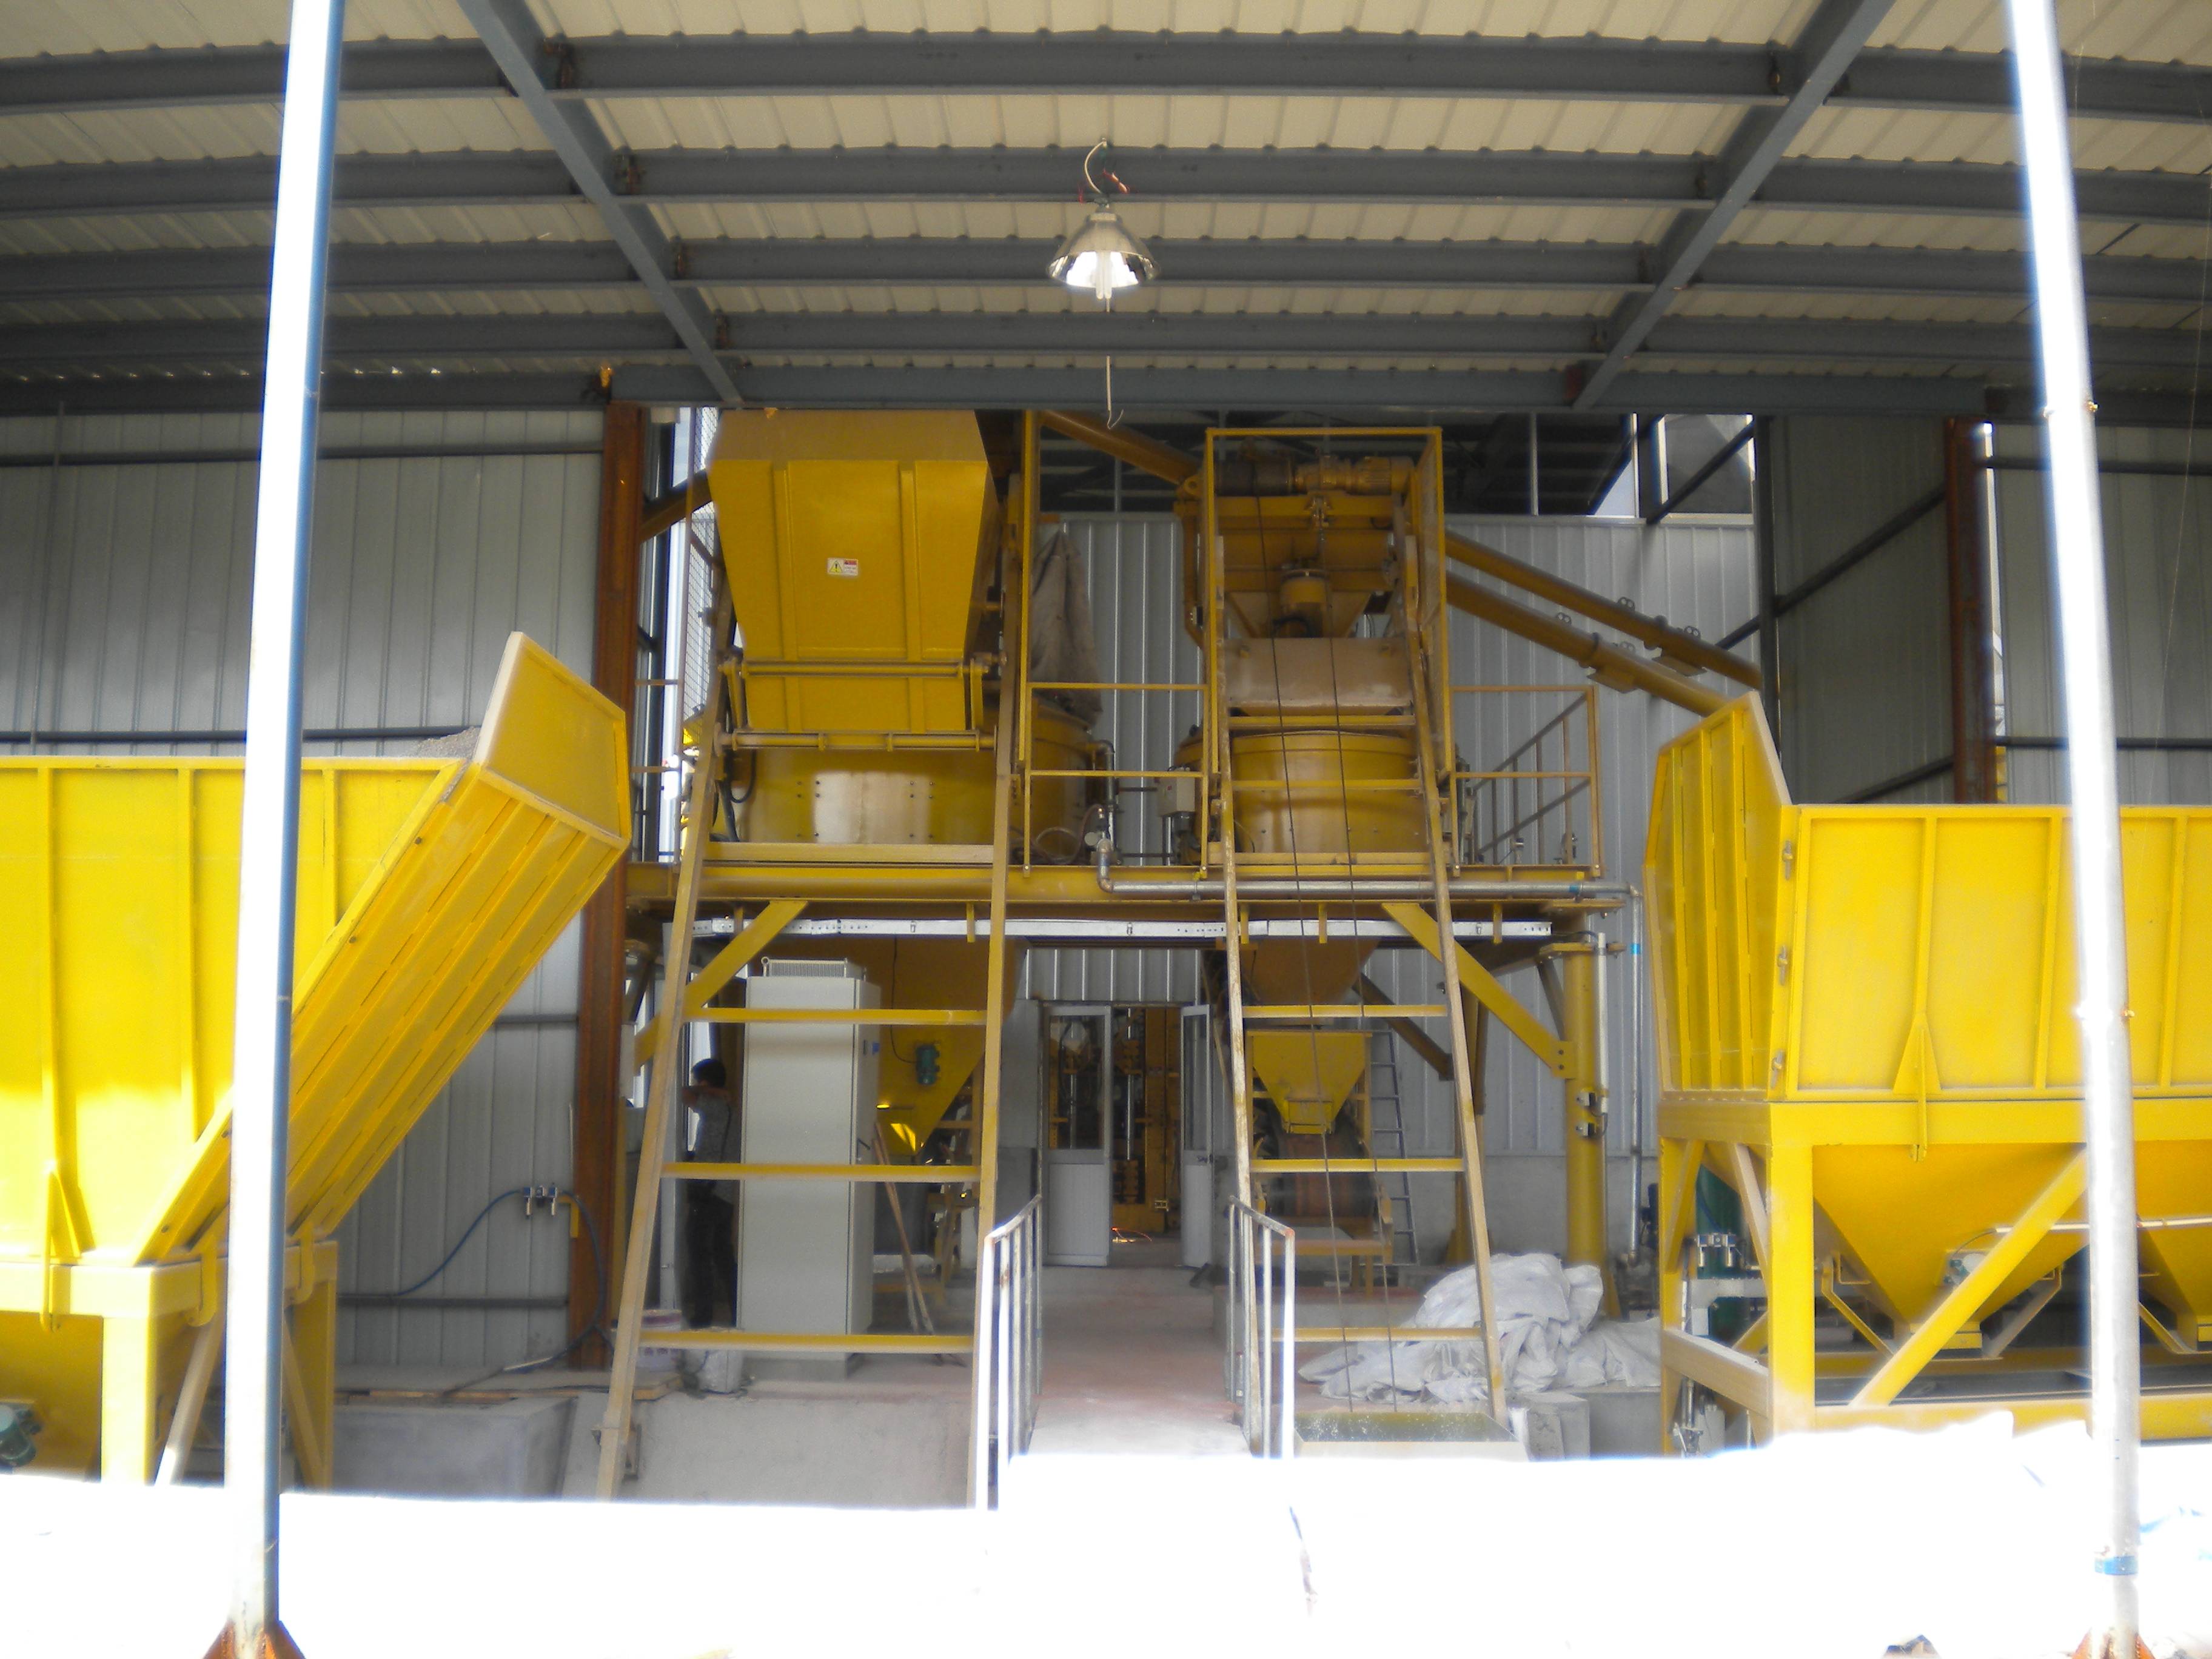 2 concrete mixers will be used for concrete block mixing mixer